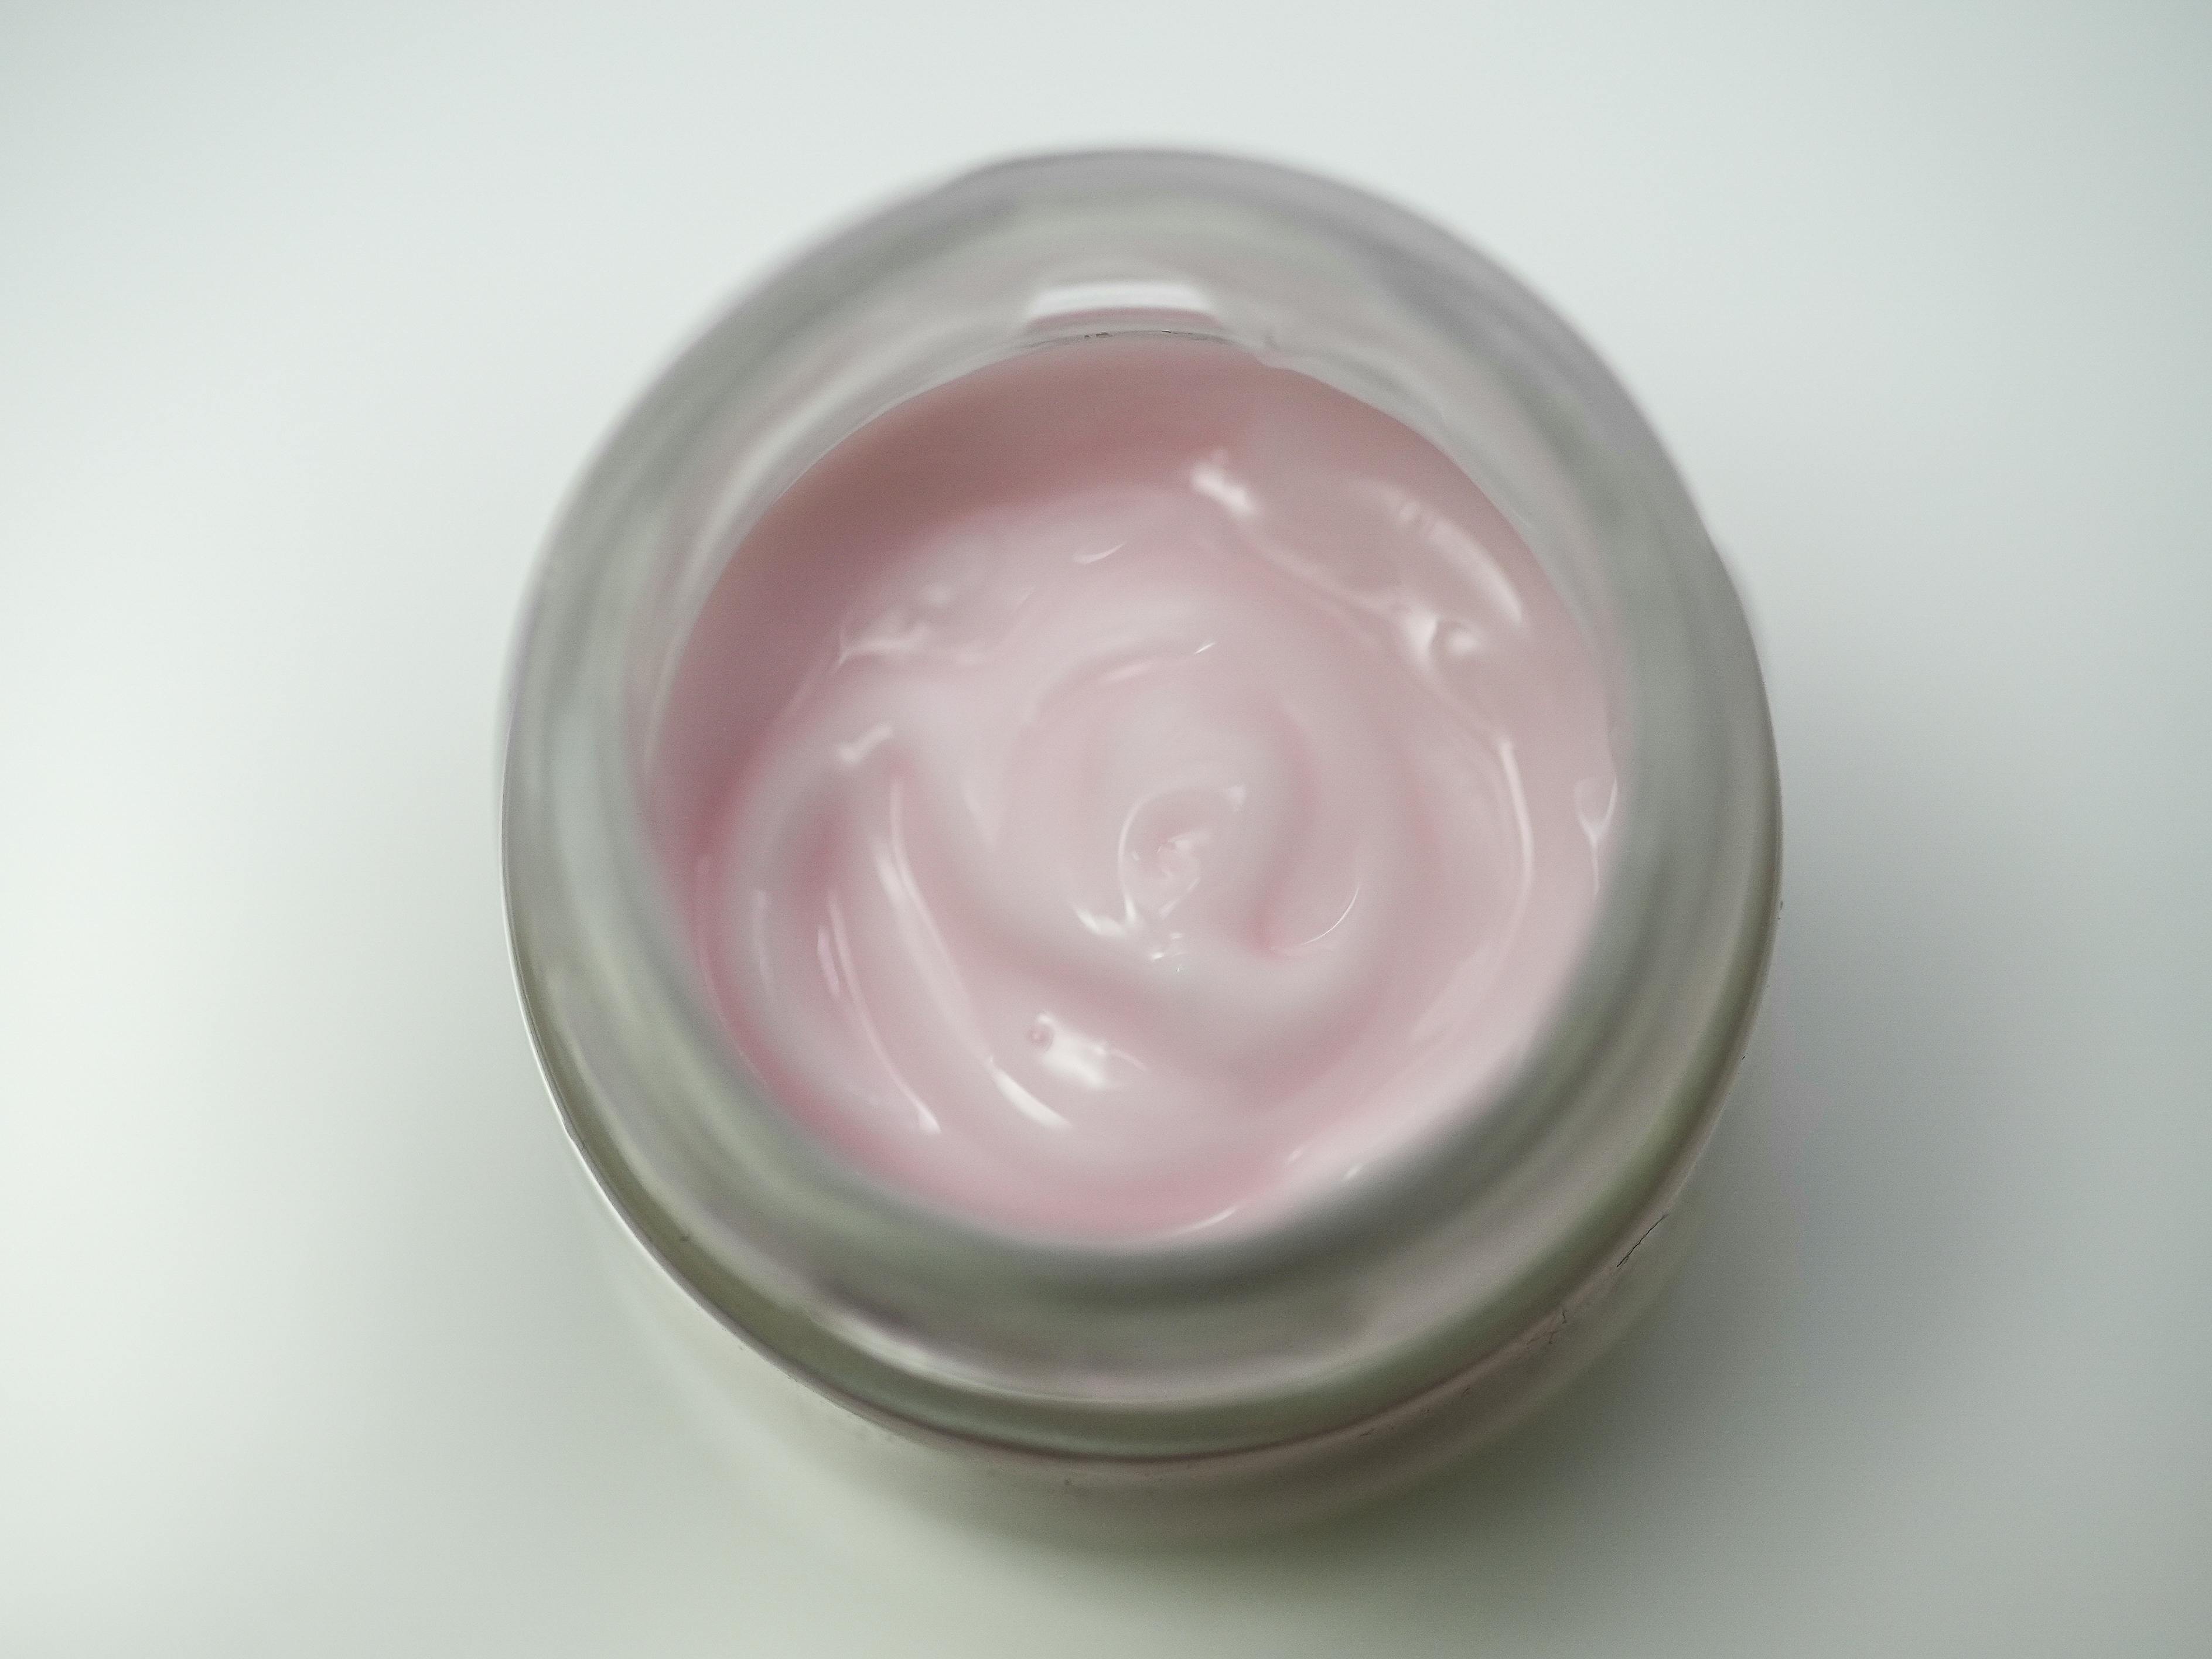 Pink cream in a jar on a white background